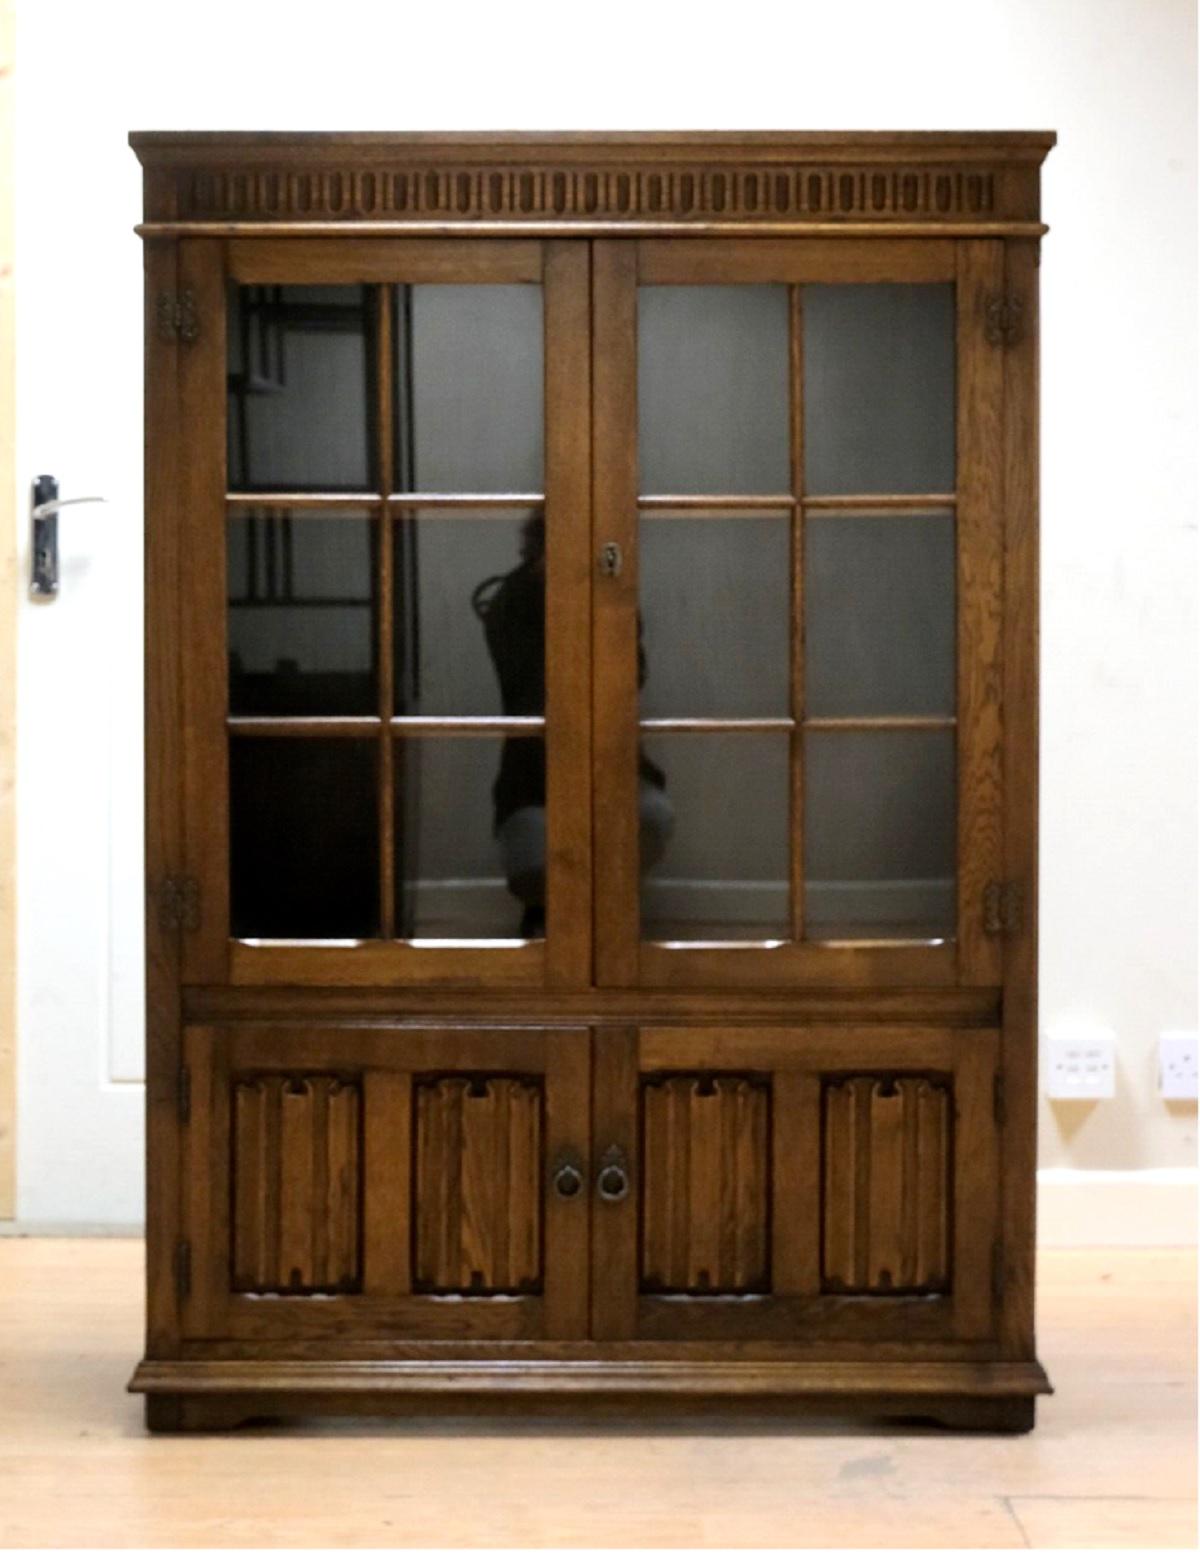 Hand-Crafted LOVELY 20TH CENTURY BROWN OAK DiSPLAY CABINET WITH KEY & ADJUSTABLE SHELVES